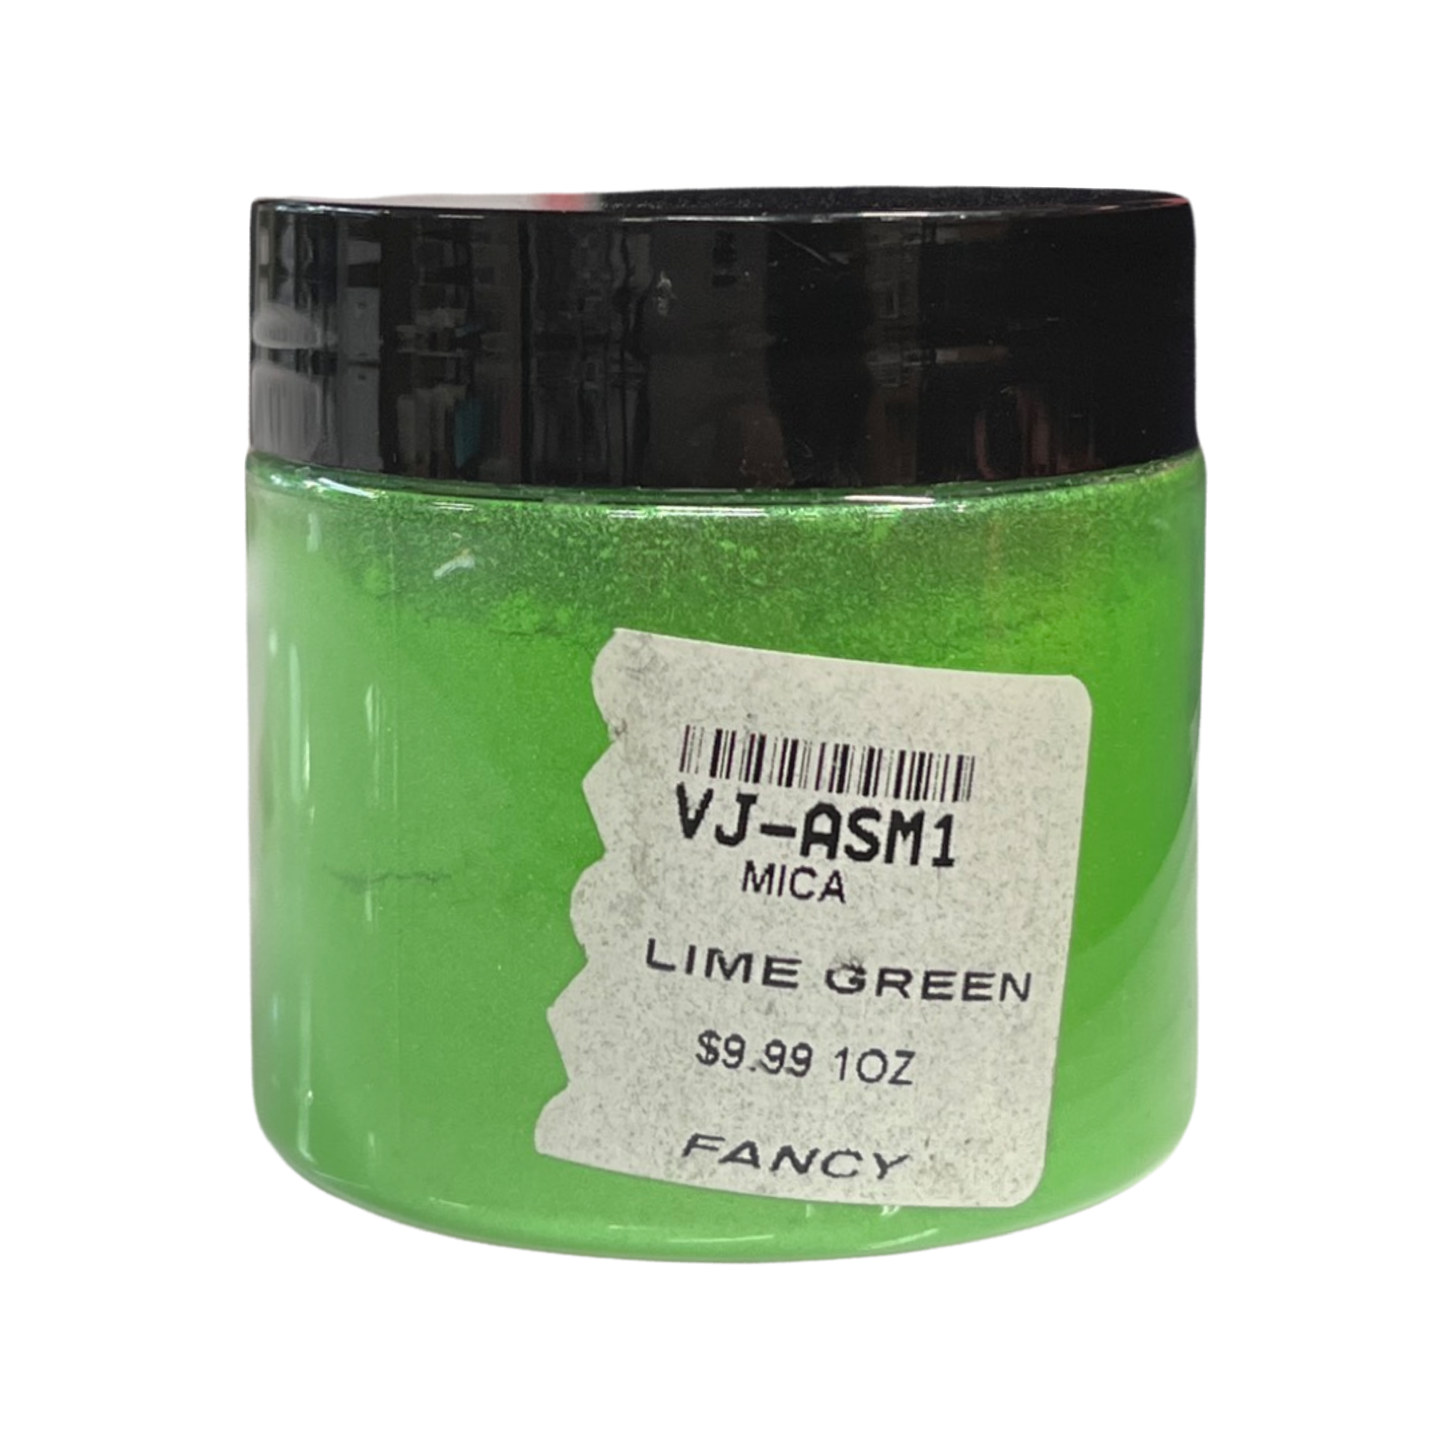 MICA LIME GREEN 1 ONZA